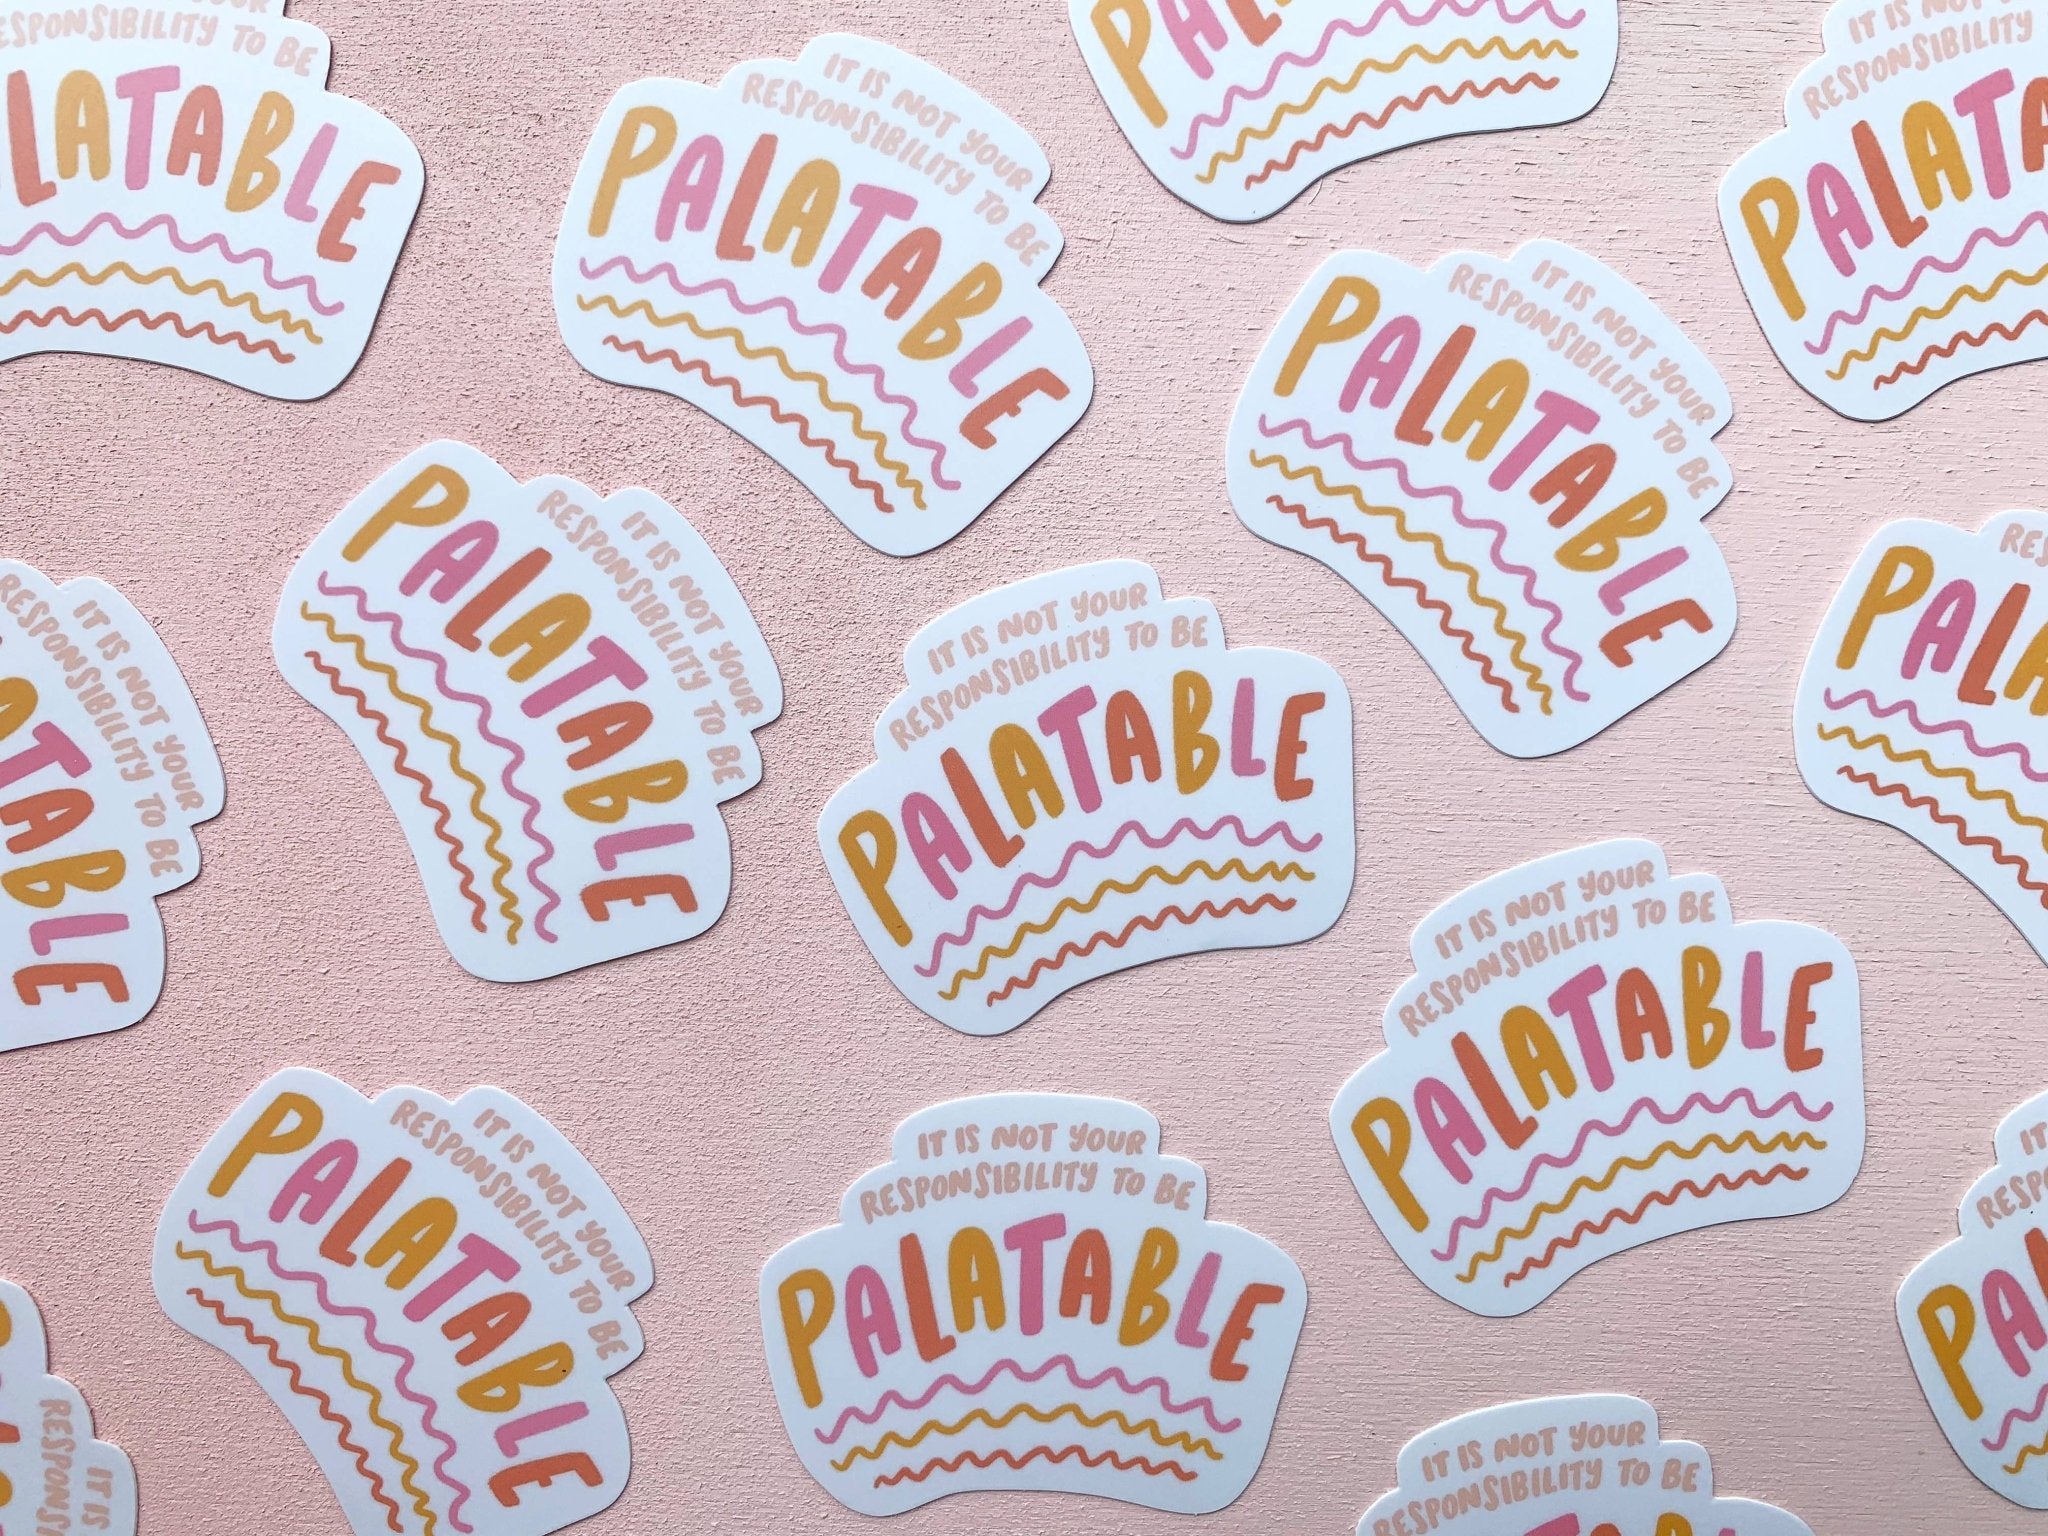 Responsibility to be Palatable Sticker - SuperMom Headquarters